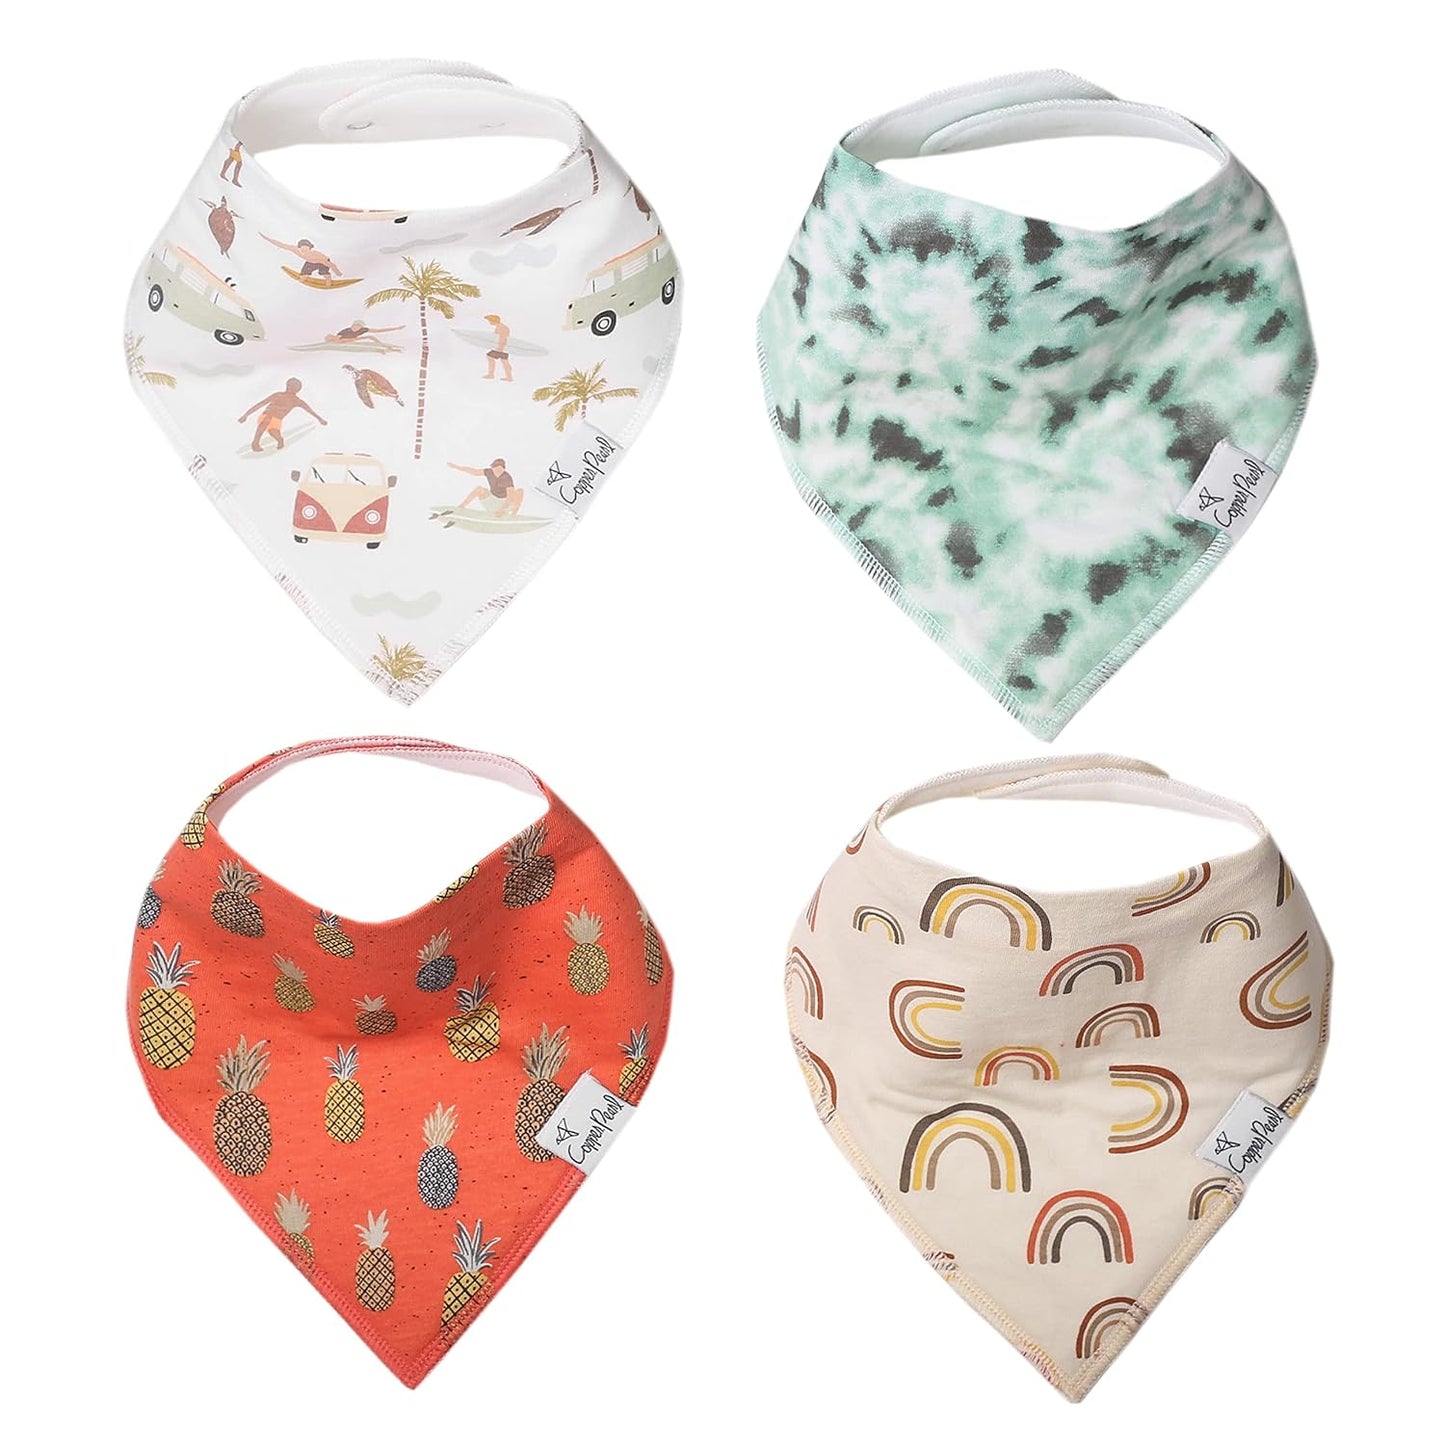 Copper Pearl Baby Bandana Drool Bibs for Drooling and Teething 4 Pack Gift Set Ace, Soft Set of Cloth Bandana Bibs for Any Baby Girl or Boy, Cute Registry Ideas for Baby Shower Gifts